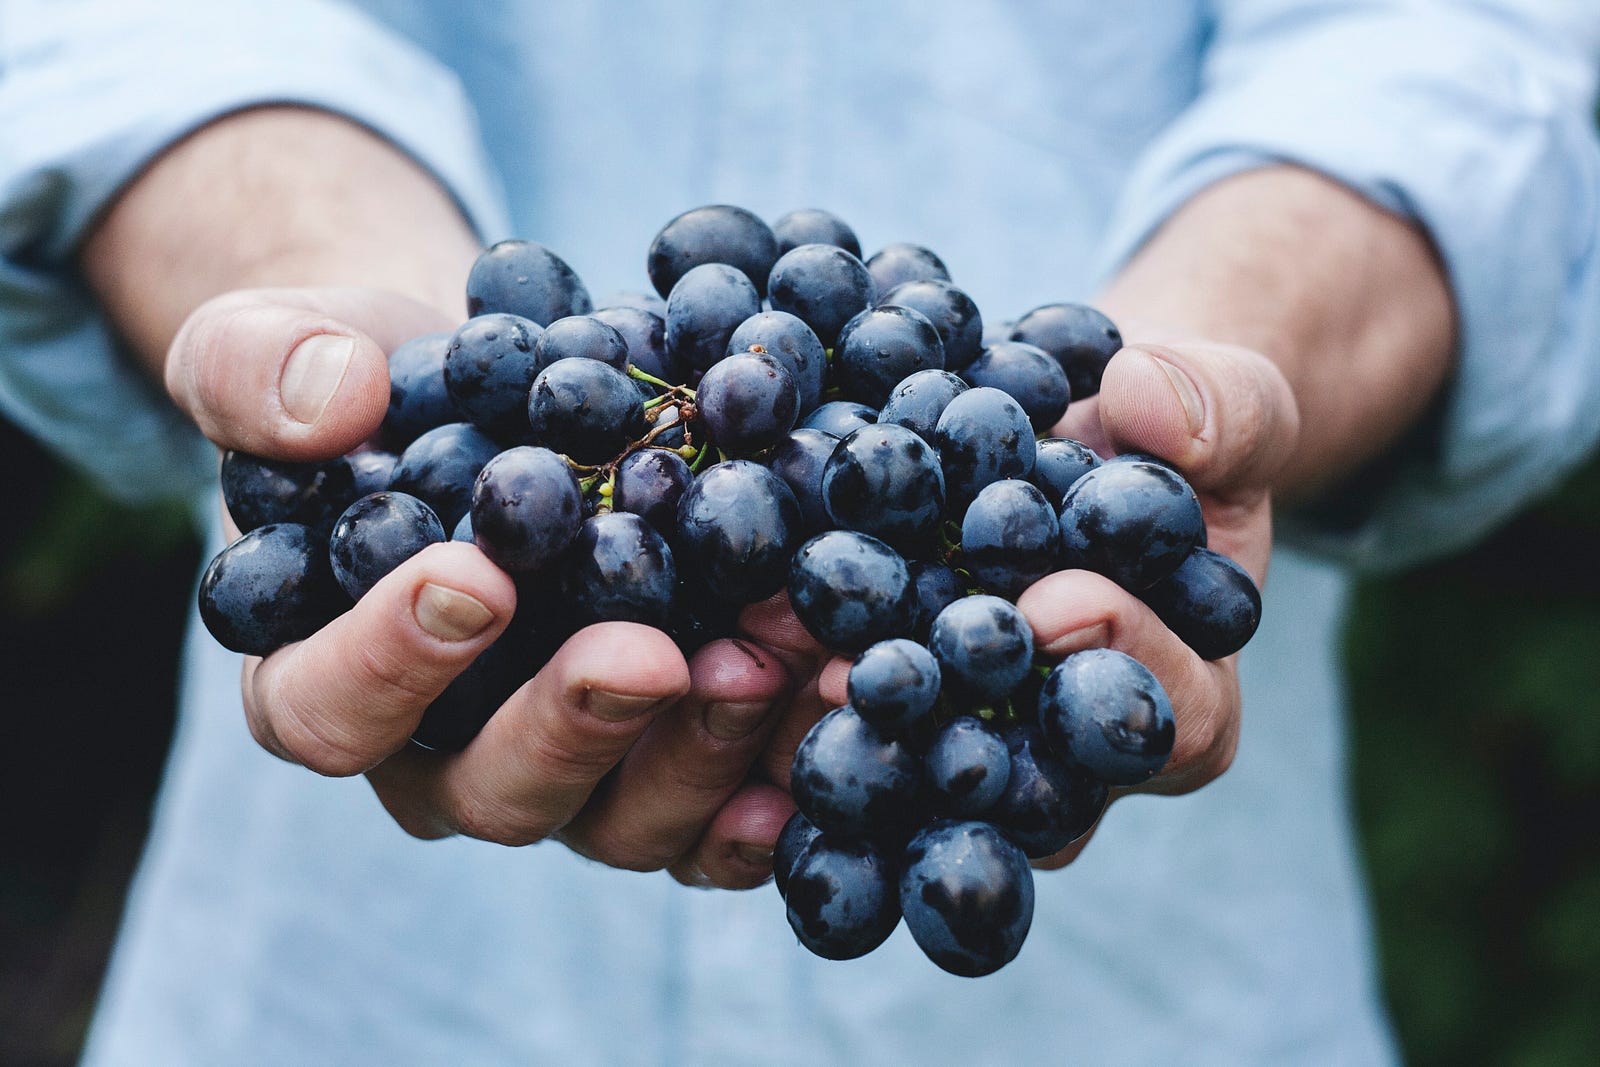 A person is in the background, with hands extended forward to hold a bunch of blueberries. In general, frozen produce is nutritionally similar to fresh produce.